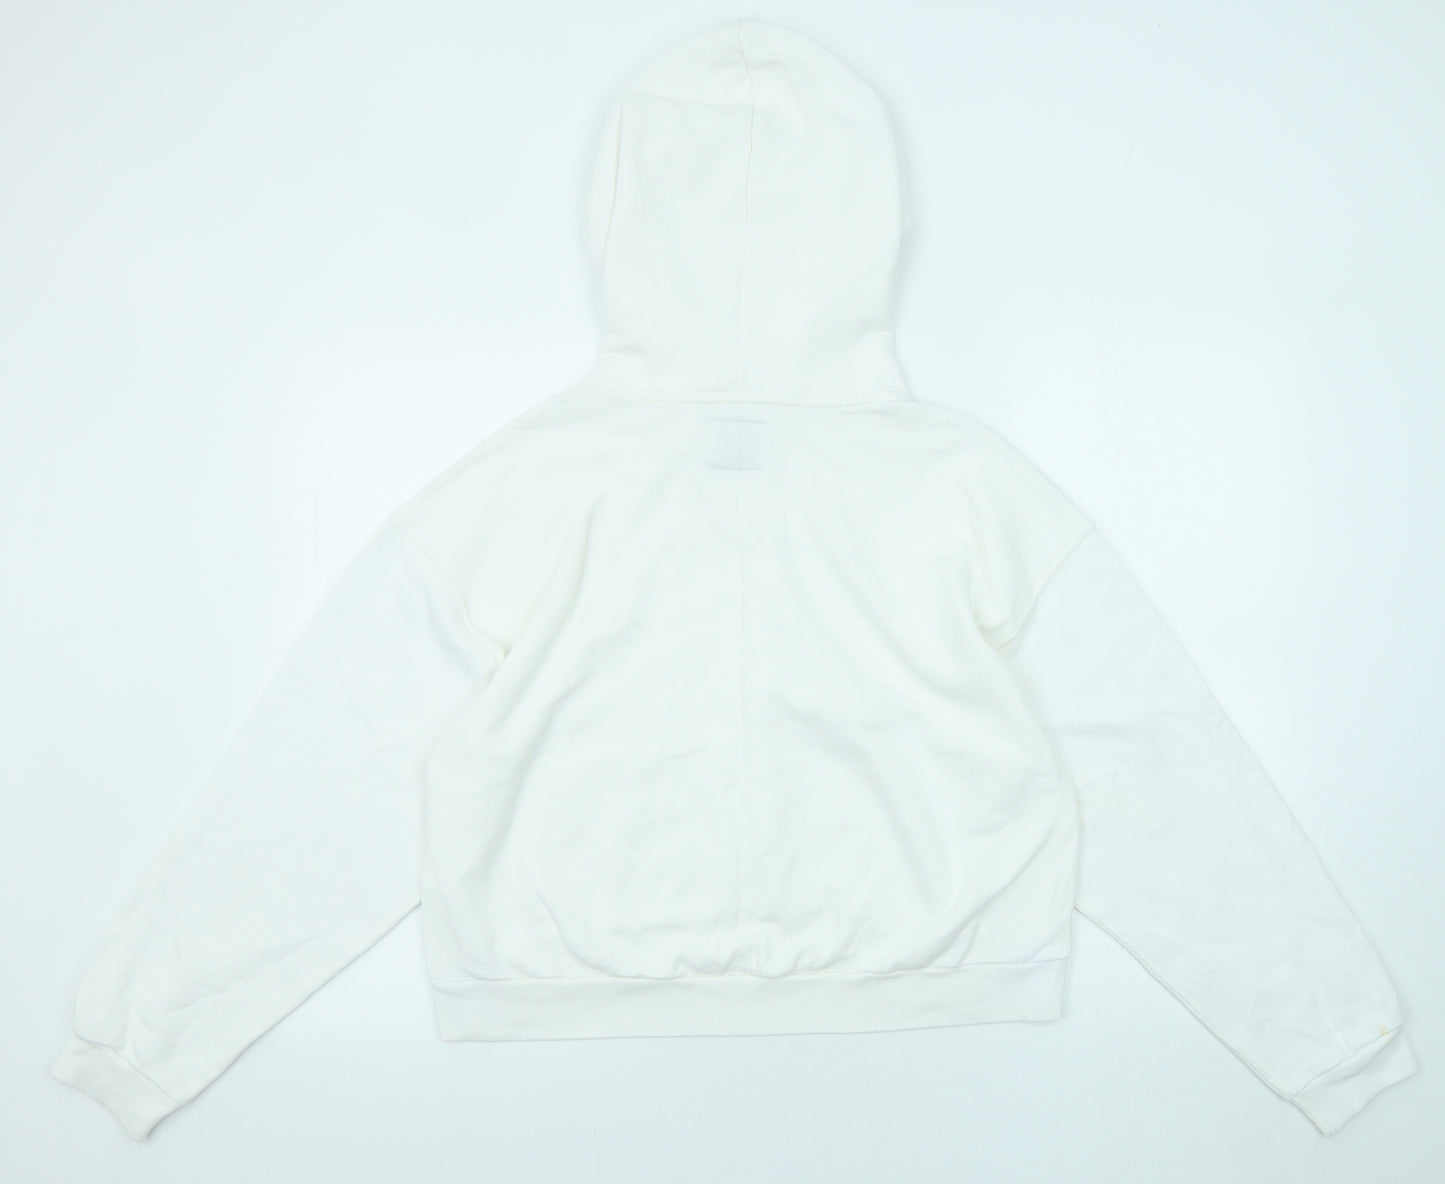 Abercrombie & Fitch Womens White Cotton Pullover Hoodie Size M Pullover